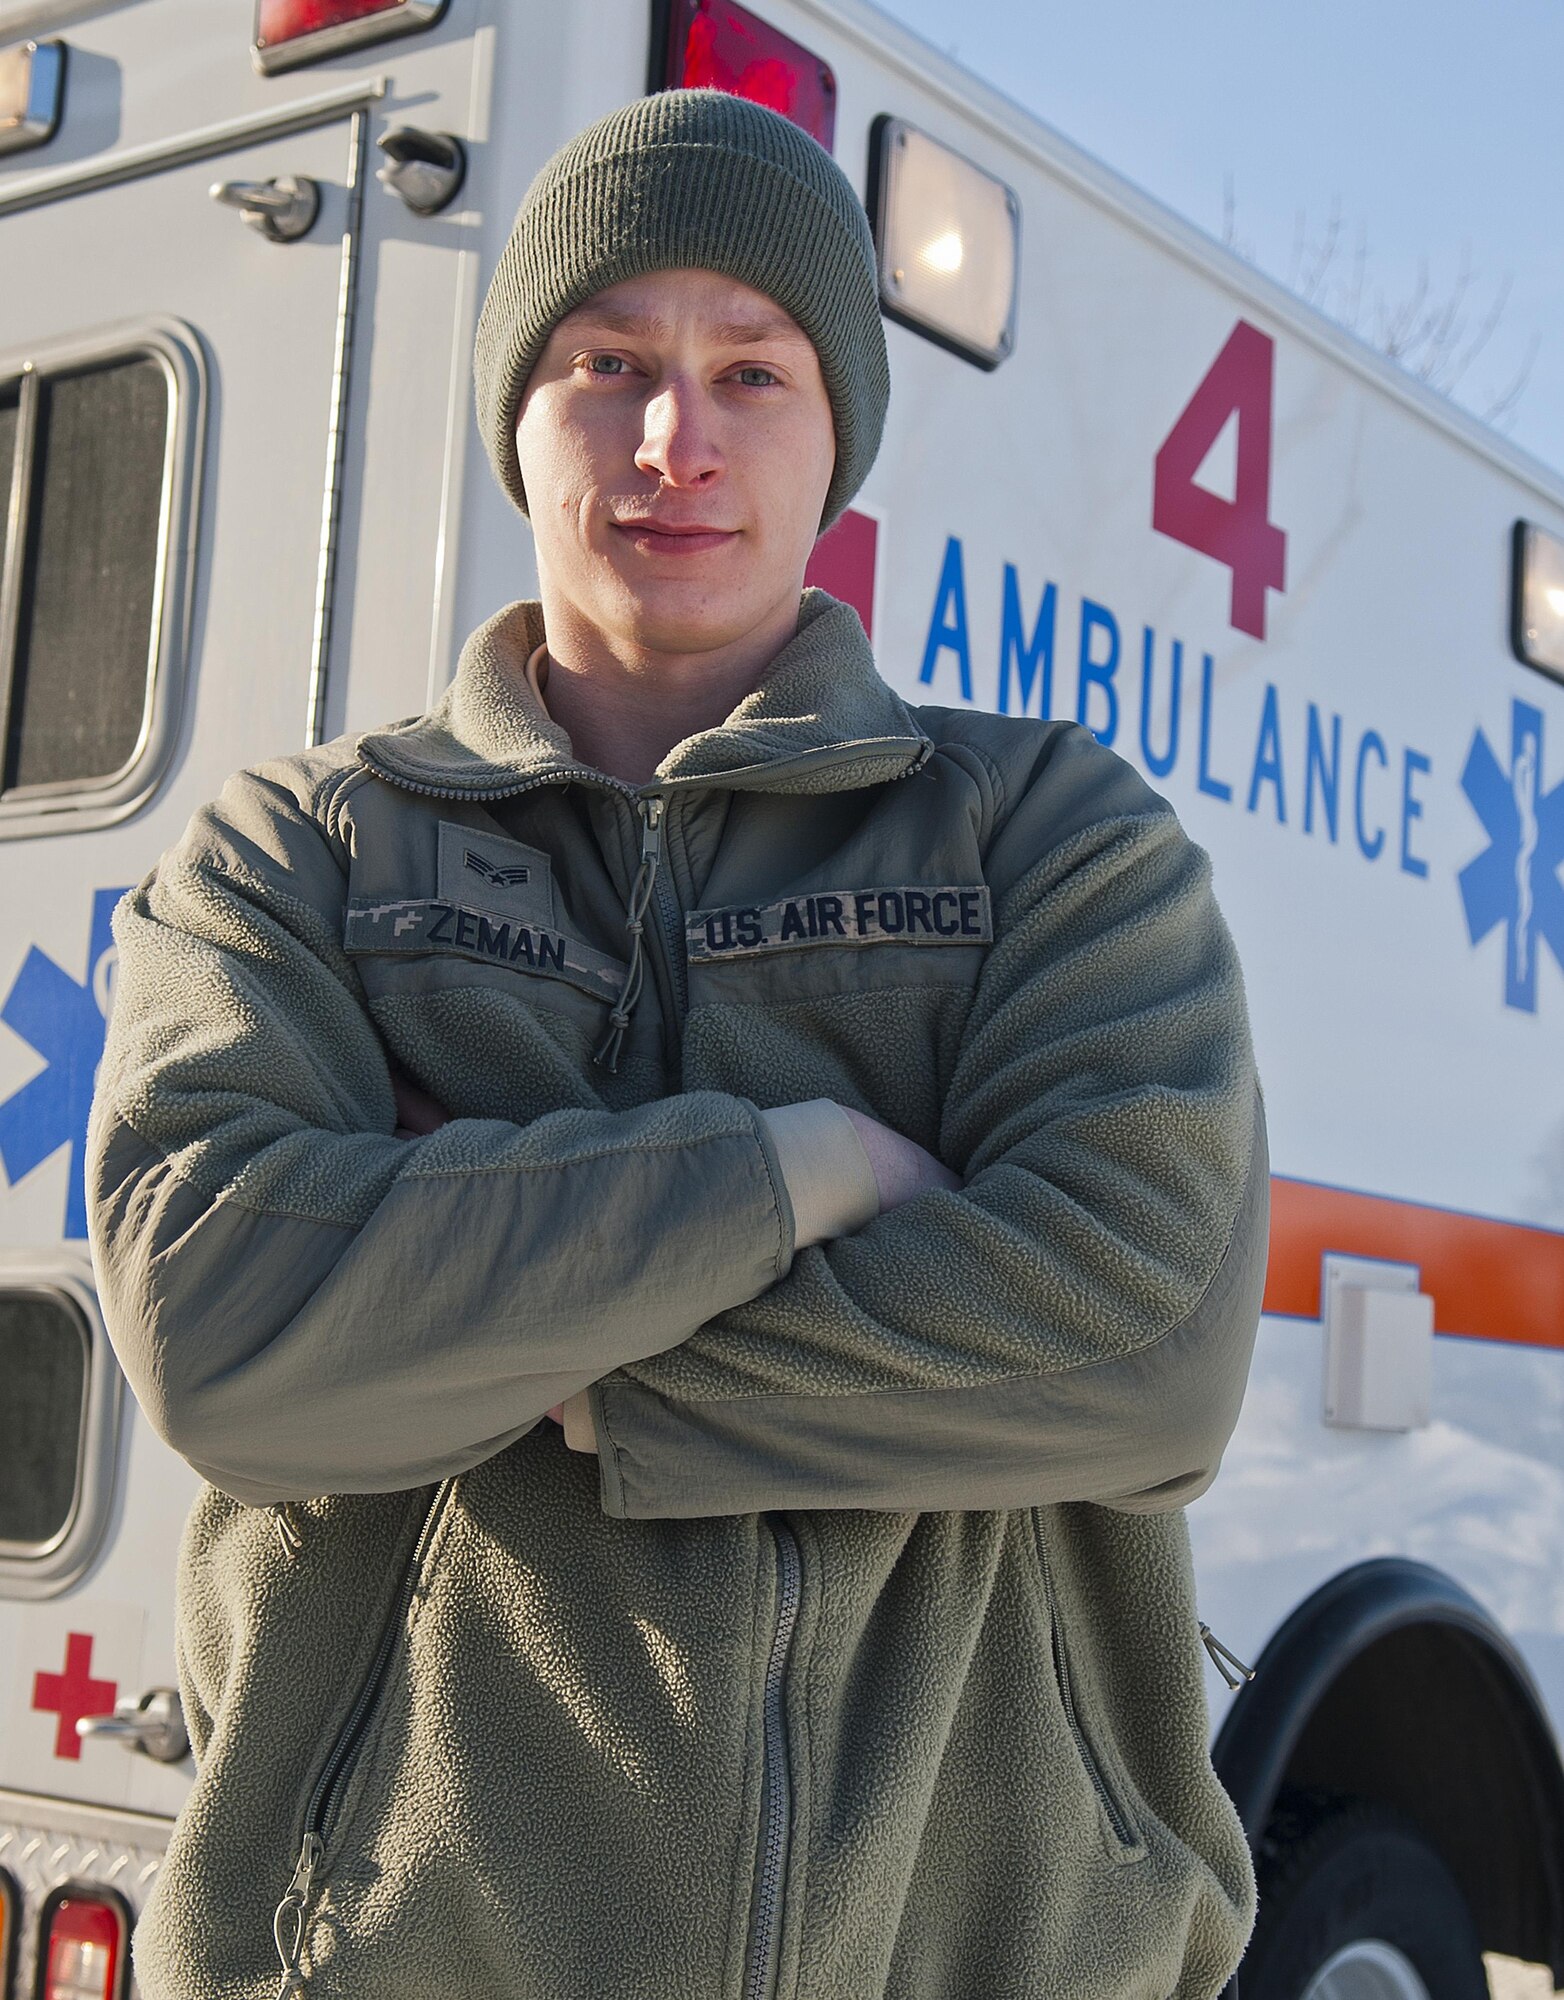 Senior Airman Larry Zeman, 5th Medical Operations Squadron aerospace medical technician, stands next to an emergency medical vehicle at Minot Air Force Base, N.D., Dec. 12, 2016. The ambulance services department is responsible for providing emergency medical response for all personnel on base. (U.S. Air Force photo/Airman 1st Class Jonathan McElderry)